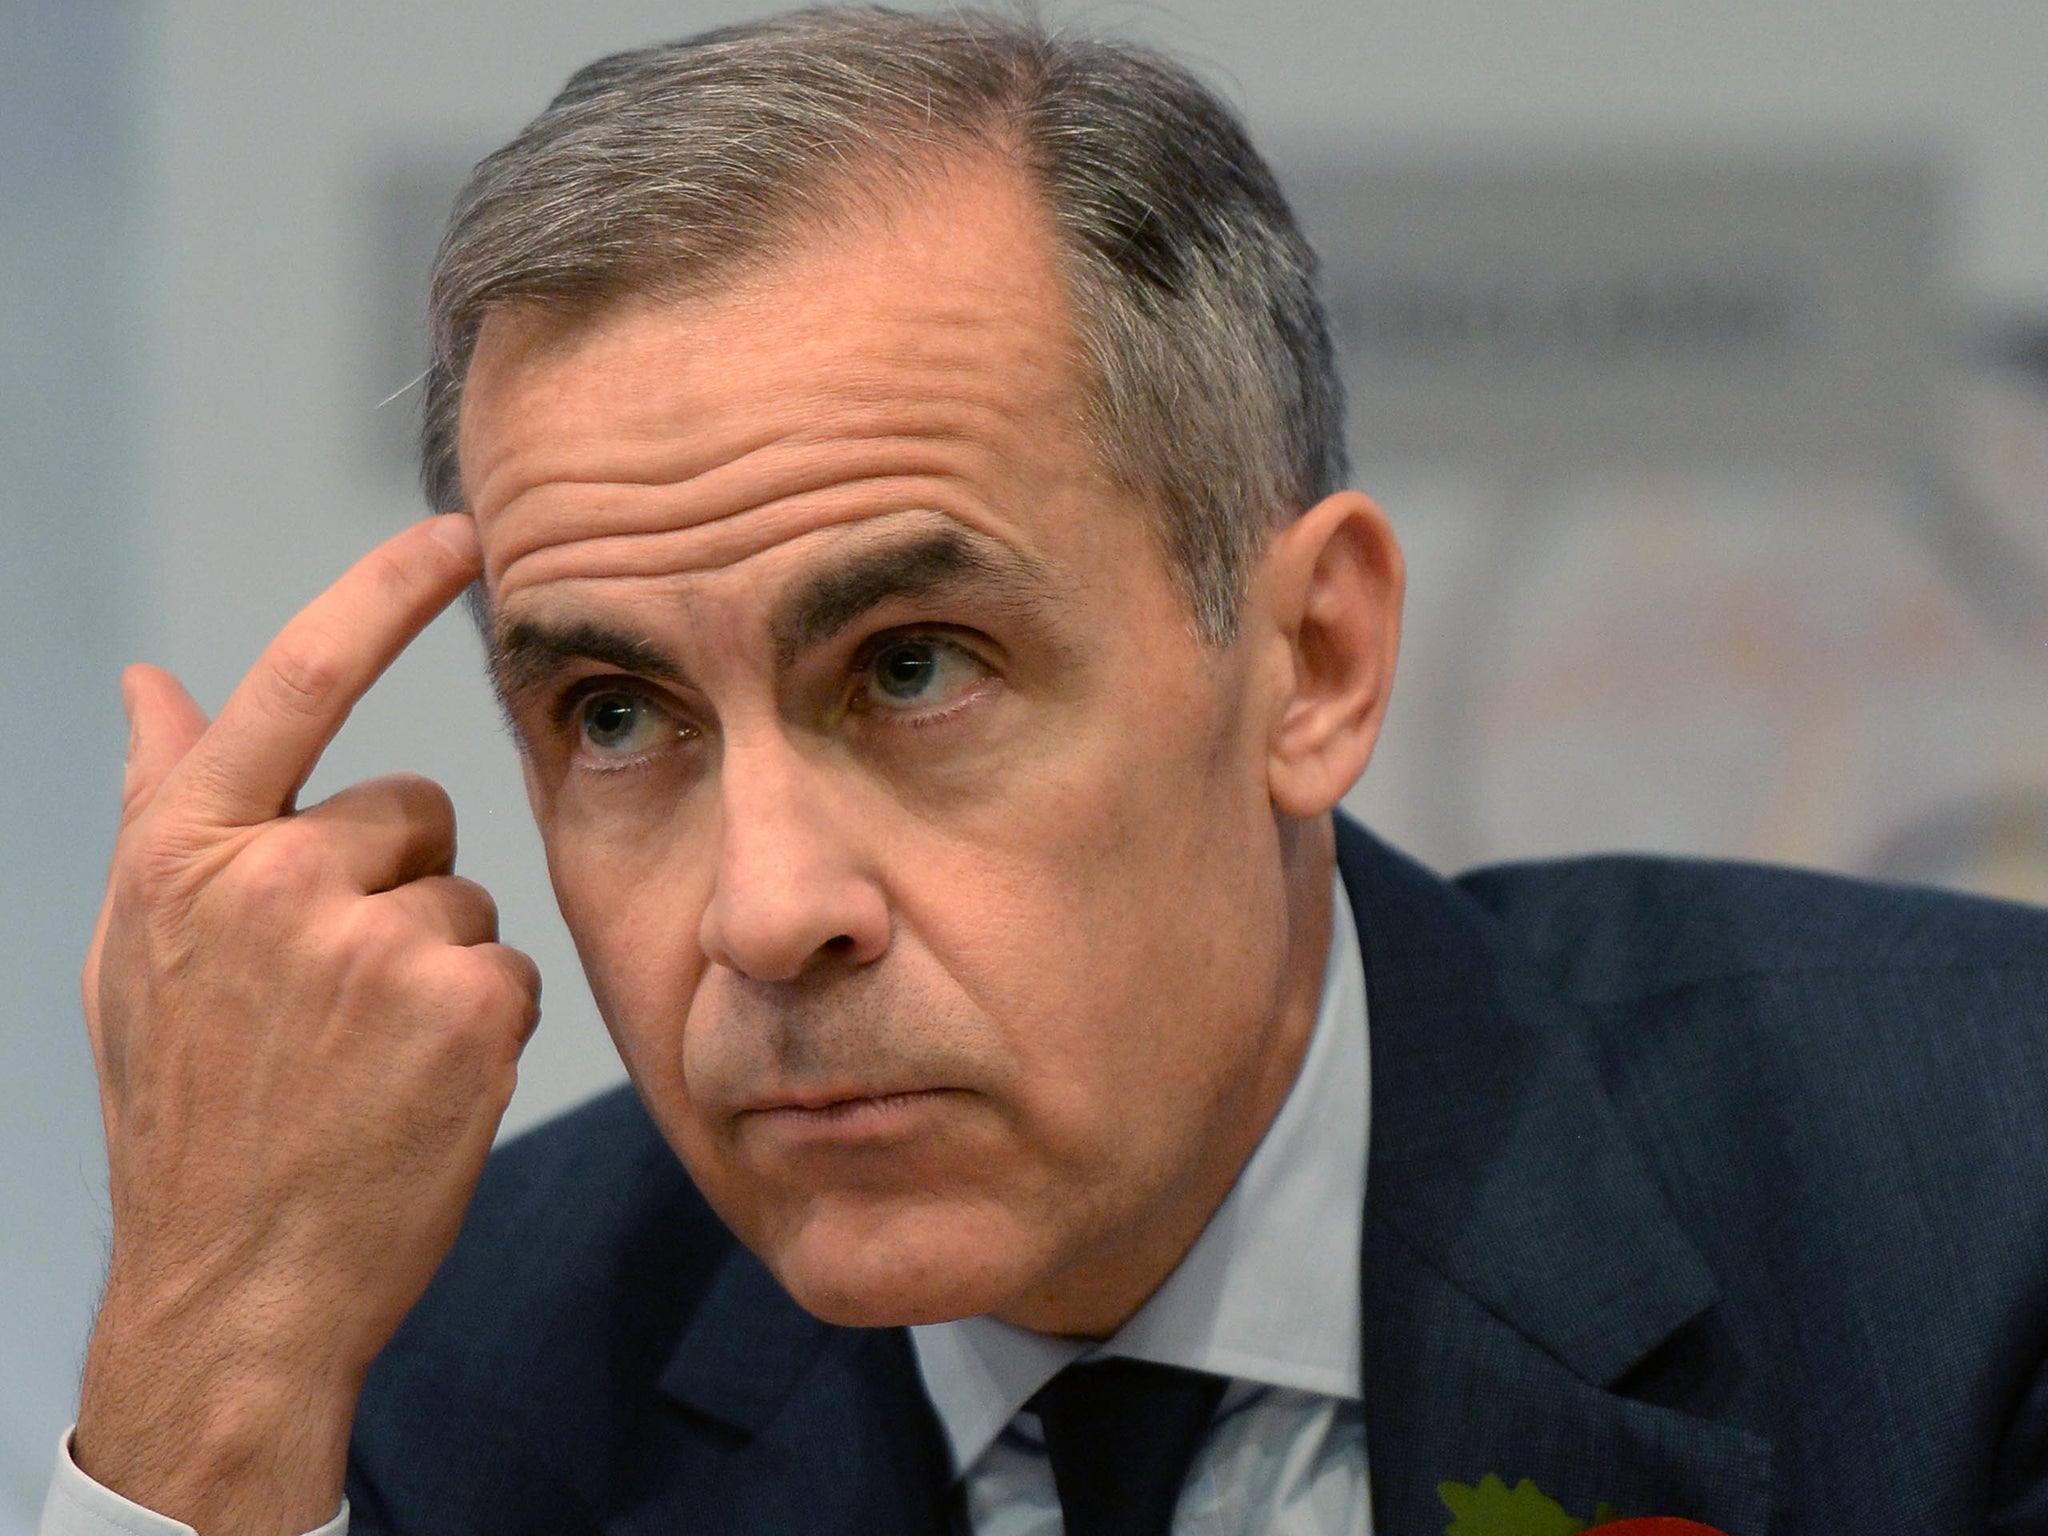 Mark Carney has stressed that 'a modest tightening of monetary policy over the forecast period will be appropriate to return inflation sustainably to its target'